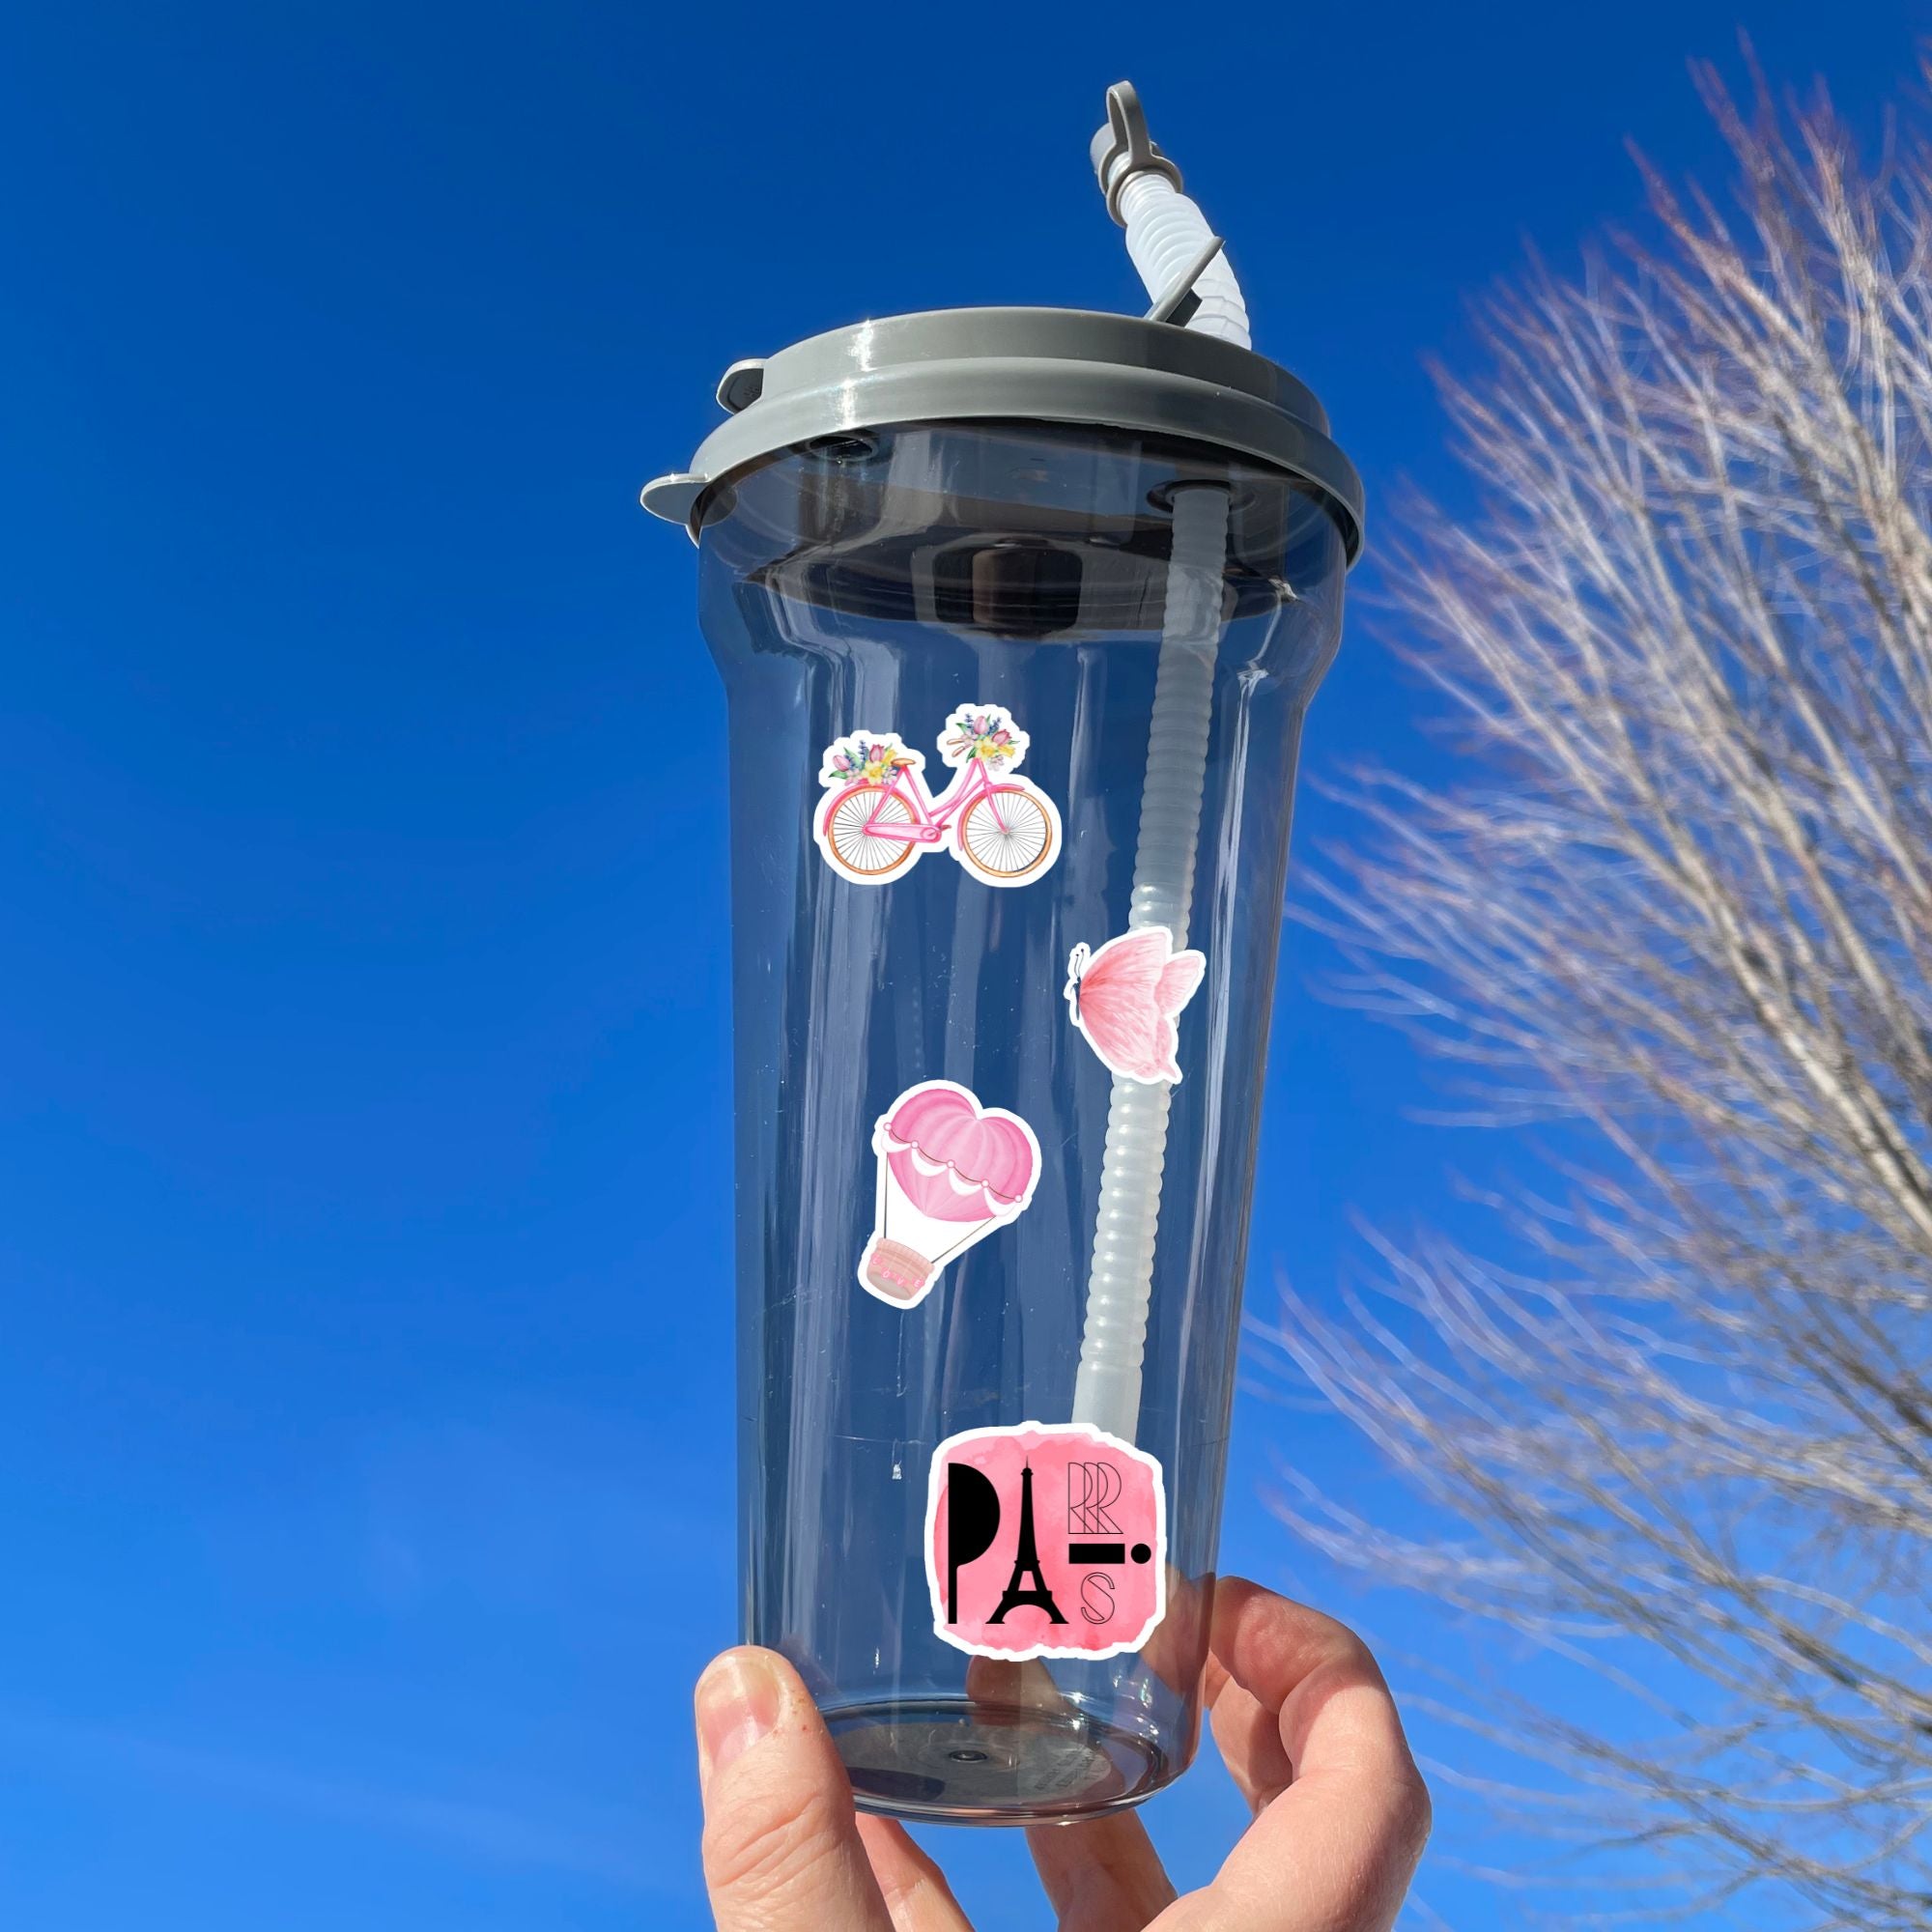  Celebrate everything Paris with this pink aesthetic on a gray background sticker sheet! Images include the Eifel Tower, perfume, balloons, and flowers. This image shows a water bottle with stickers of a bicycle with flowers on it, a butter fly, a hot air balloon, and a the word "Paris" spelled with the Eifel Tower as the "A".